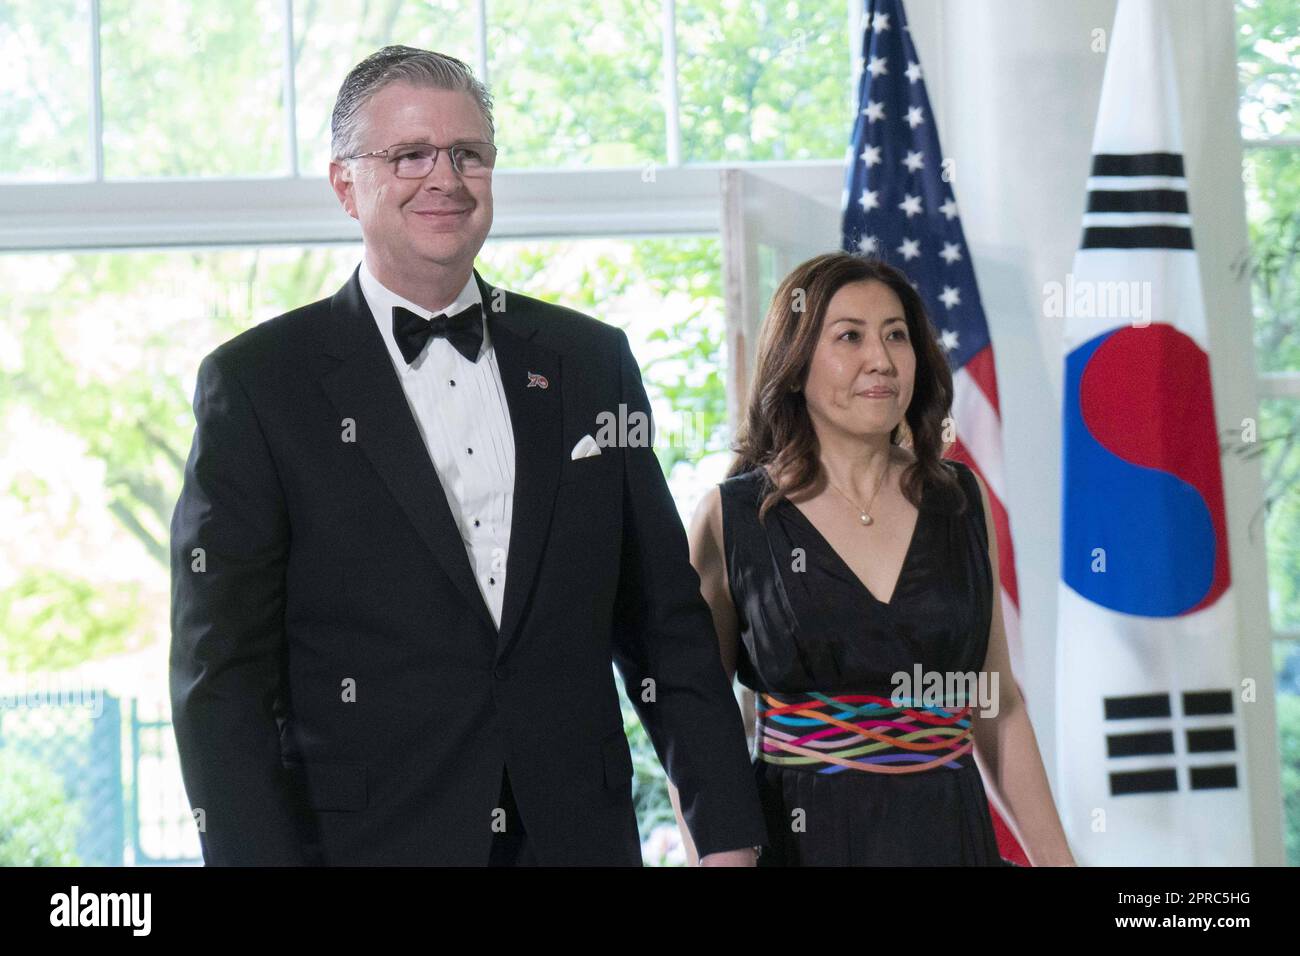 Washington, United States. 26th Apr, 2023. Assistant Secretary of State for East Asian and Pacific Affairs for the U.S. Department of State Daniel Kritenbrink and Nami Kritenbrink arrive for the State Dinner with President Joe Biden and the South Korea's President Yoon Suk Yeol at the White House in Washington, DC on Wednesday, April 26, 2023. Photo by Bonnie Cash/UPI Credit: UPI/Alamy Live News Stock Photo